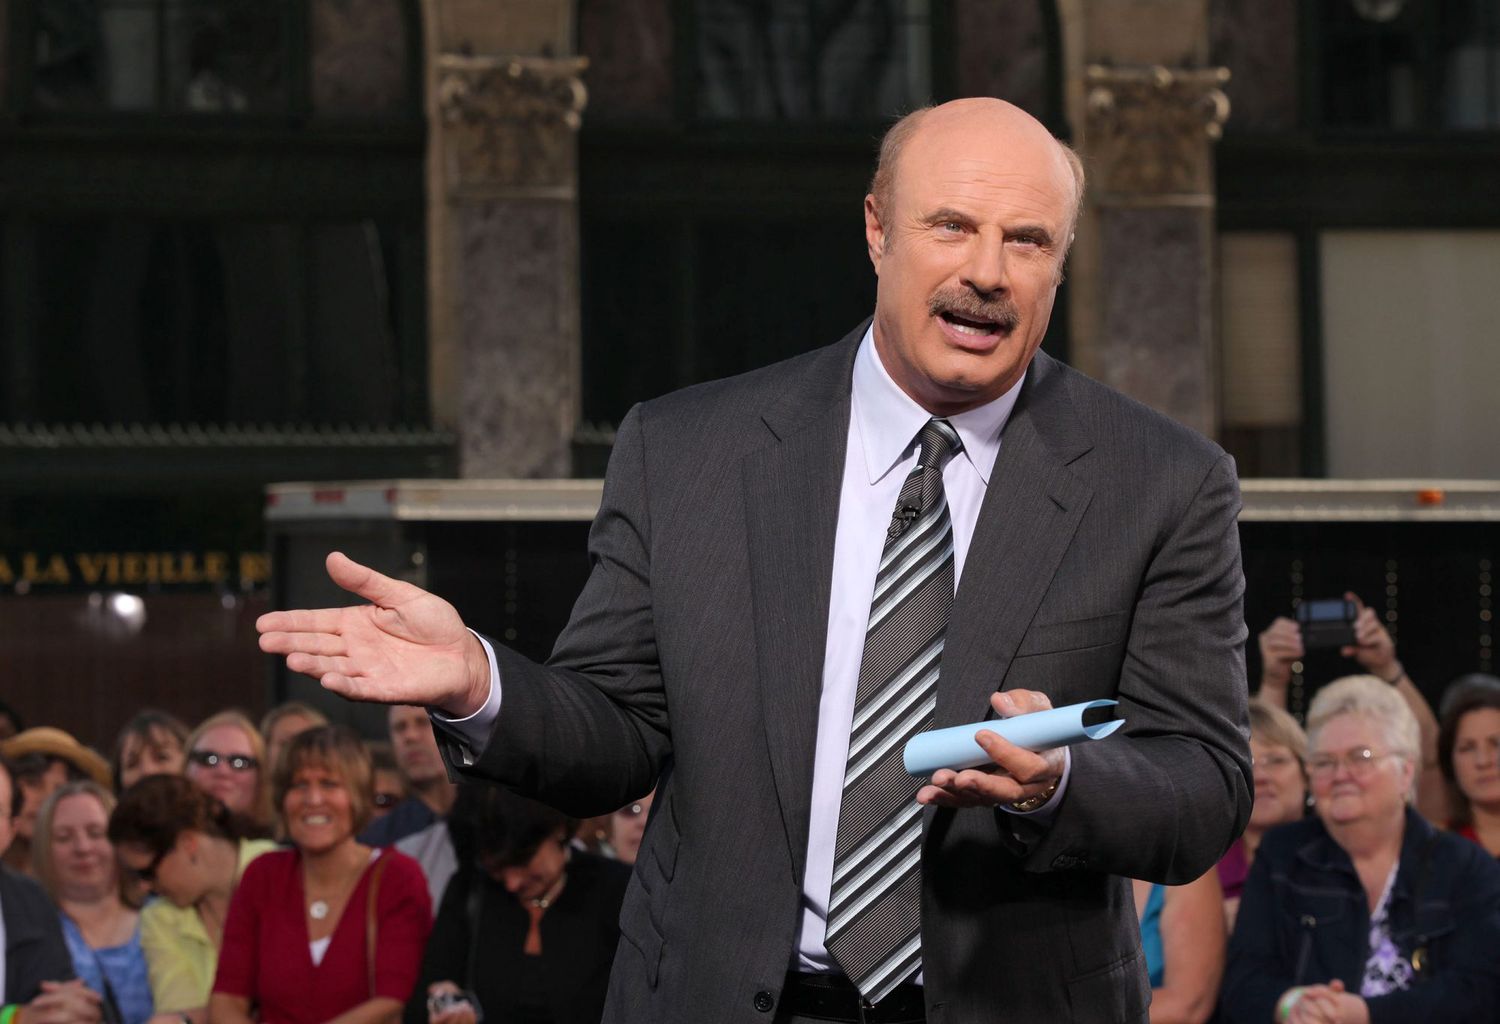 Dr Phil Hits The Streets to Launch 8th Season of Dr Phil On CBS - Day 4